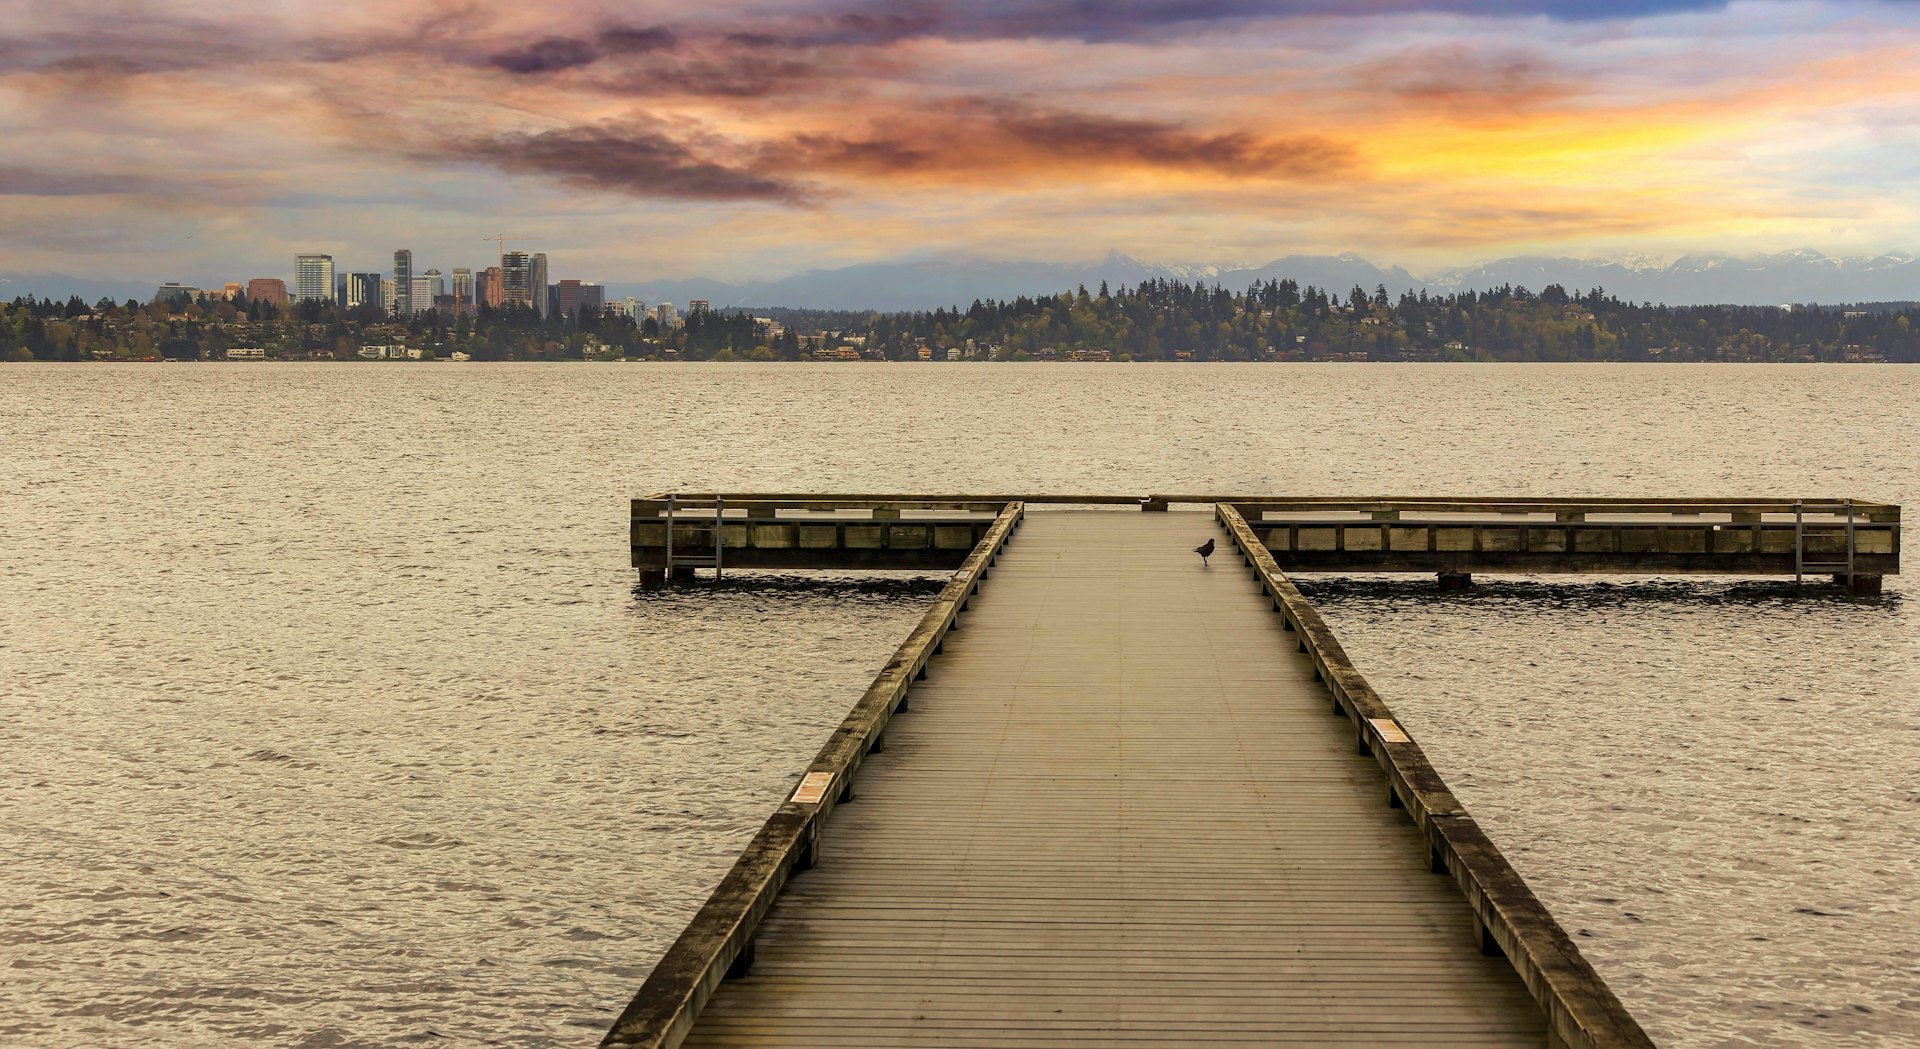 The Dock at Madrona Beach on Washington Lake in Seattle during sunset.